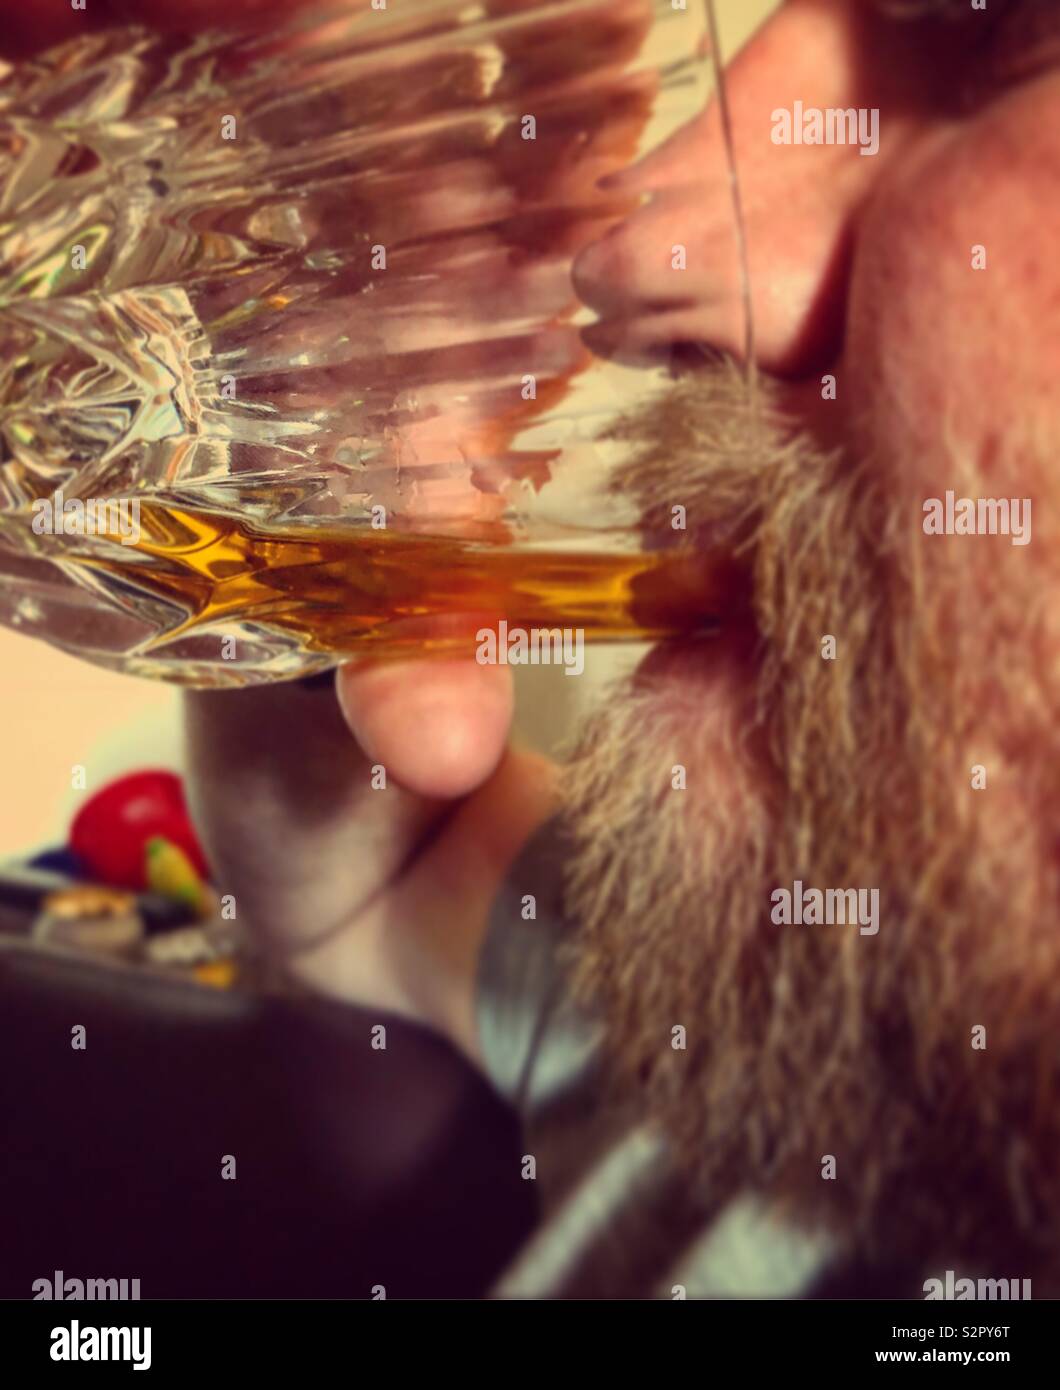 Man drinking whiskey Banque D'Images